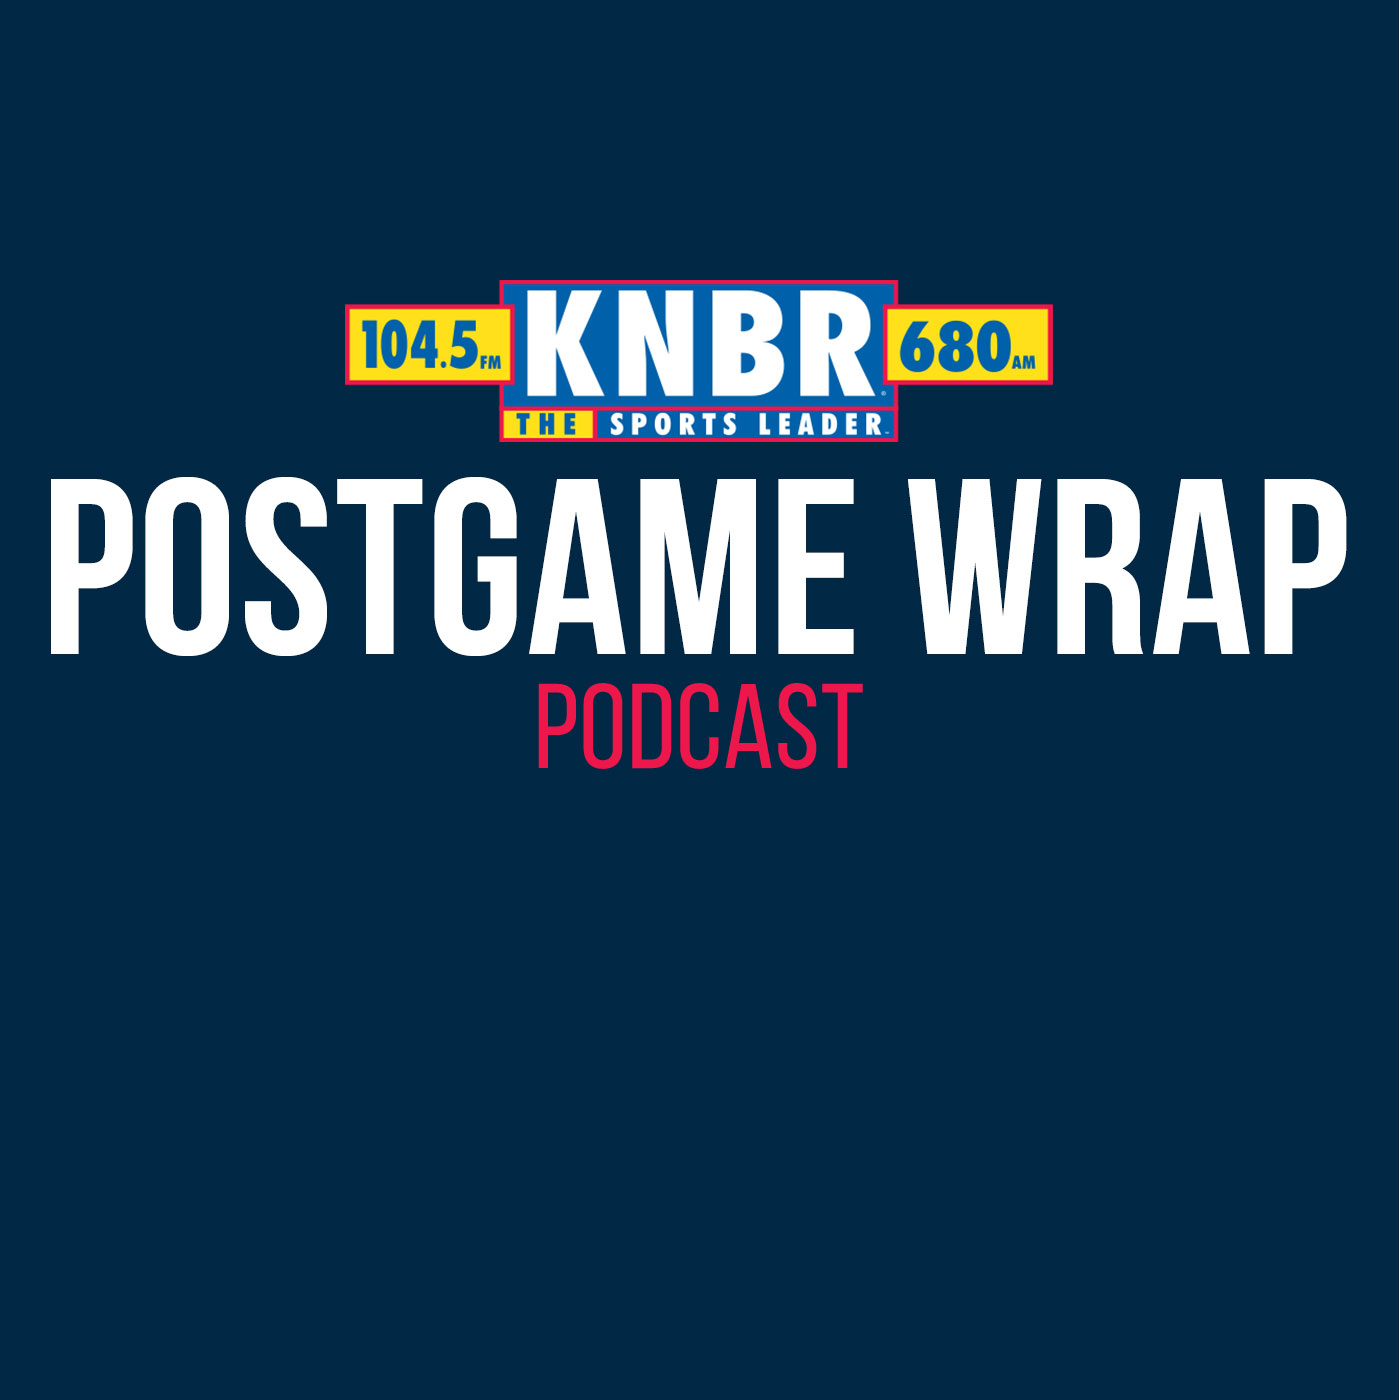 9-5 Postgame Wrap: Cubs 11, Giants 8